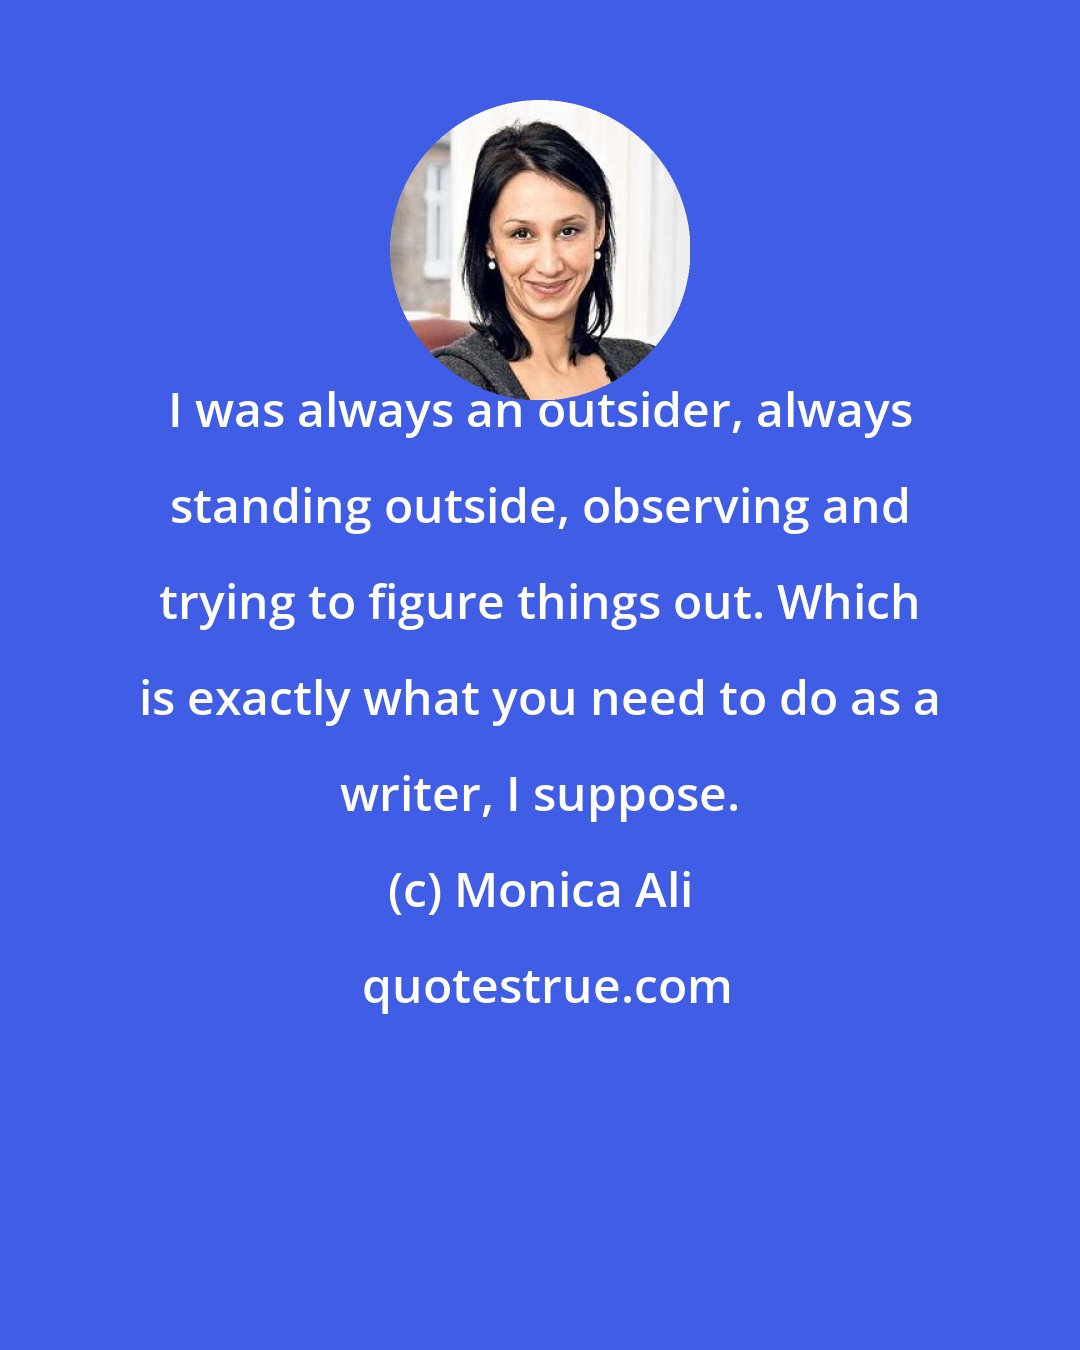 Monica Ali: I was always an outsider, always standing outside, observing and trying to figure things out. Which is exactly what you need to do as a writer, I suppose.